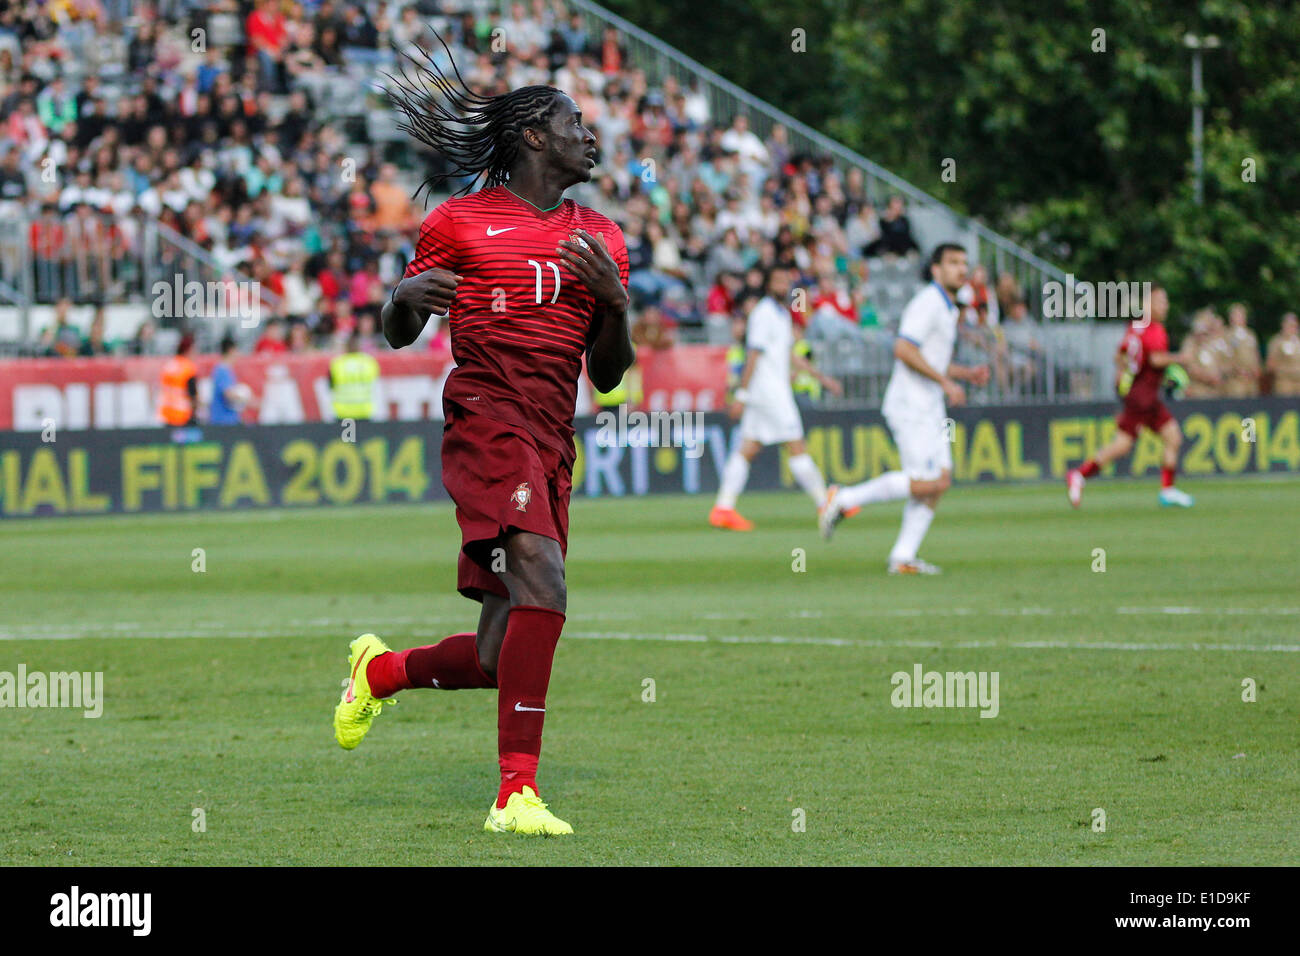 Lisbon, Porrtugal. 31st May, 2014. Portugal forward Eder (11) during preparatory friendly match for the World Cup at the National Stadium in Lisbon, Portugal, Saturday, May 31, 2014. Credit:  Leonardo Mota/Alamy Live News Stock Photo